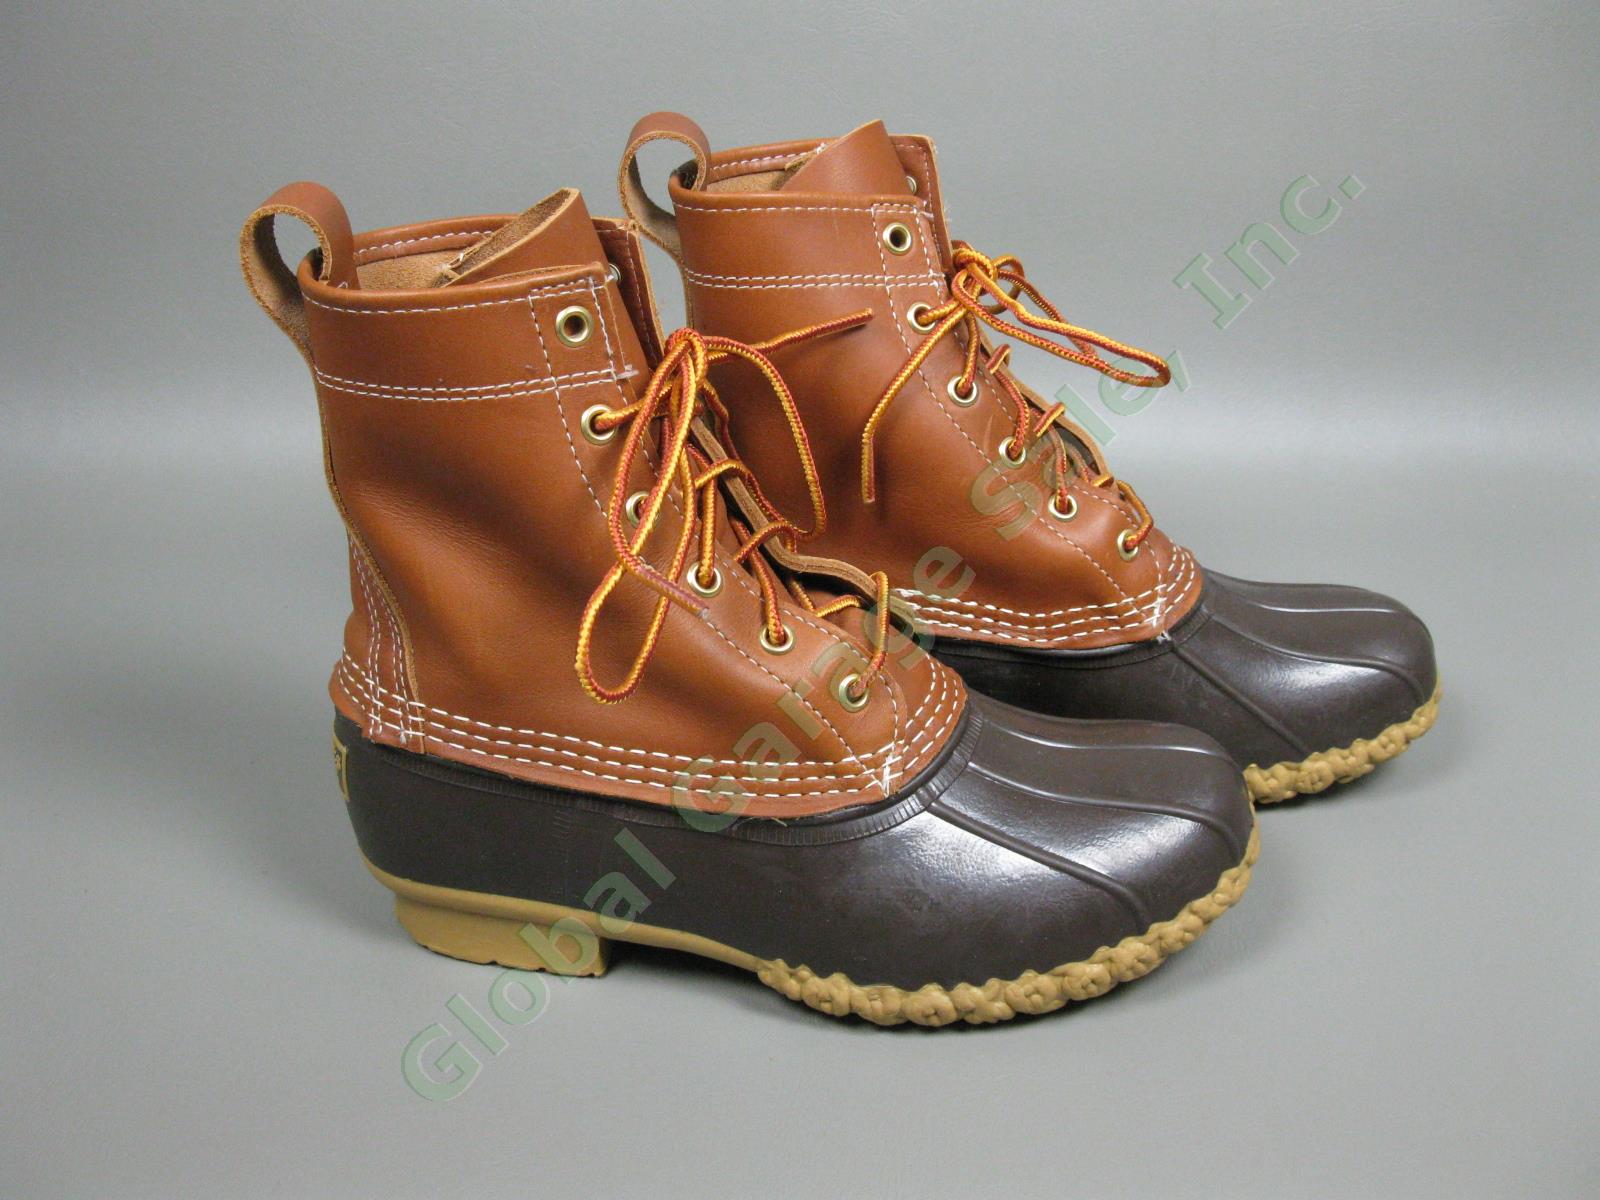 LL Bean Original Leather/Rubber 8" Duck Boots Womens Size 6 USA Made #06009 NR 4